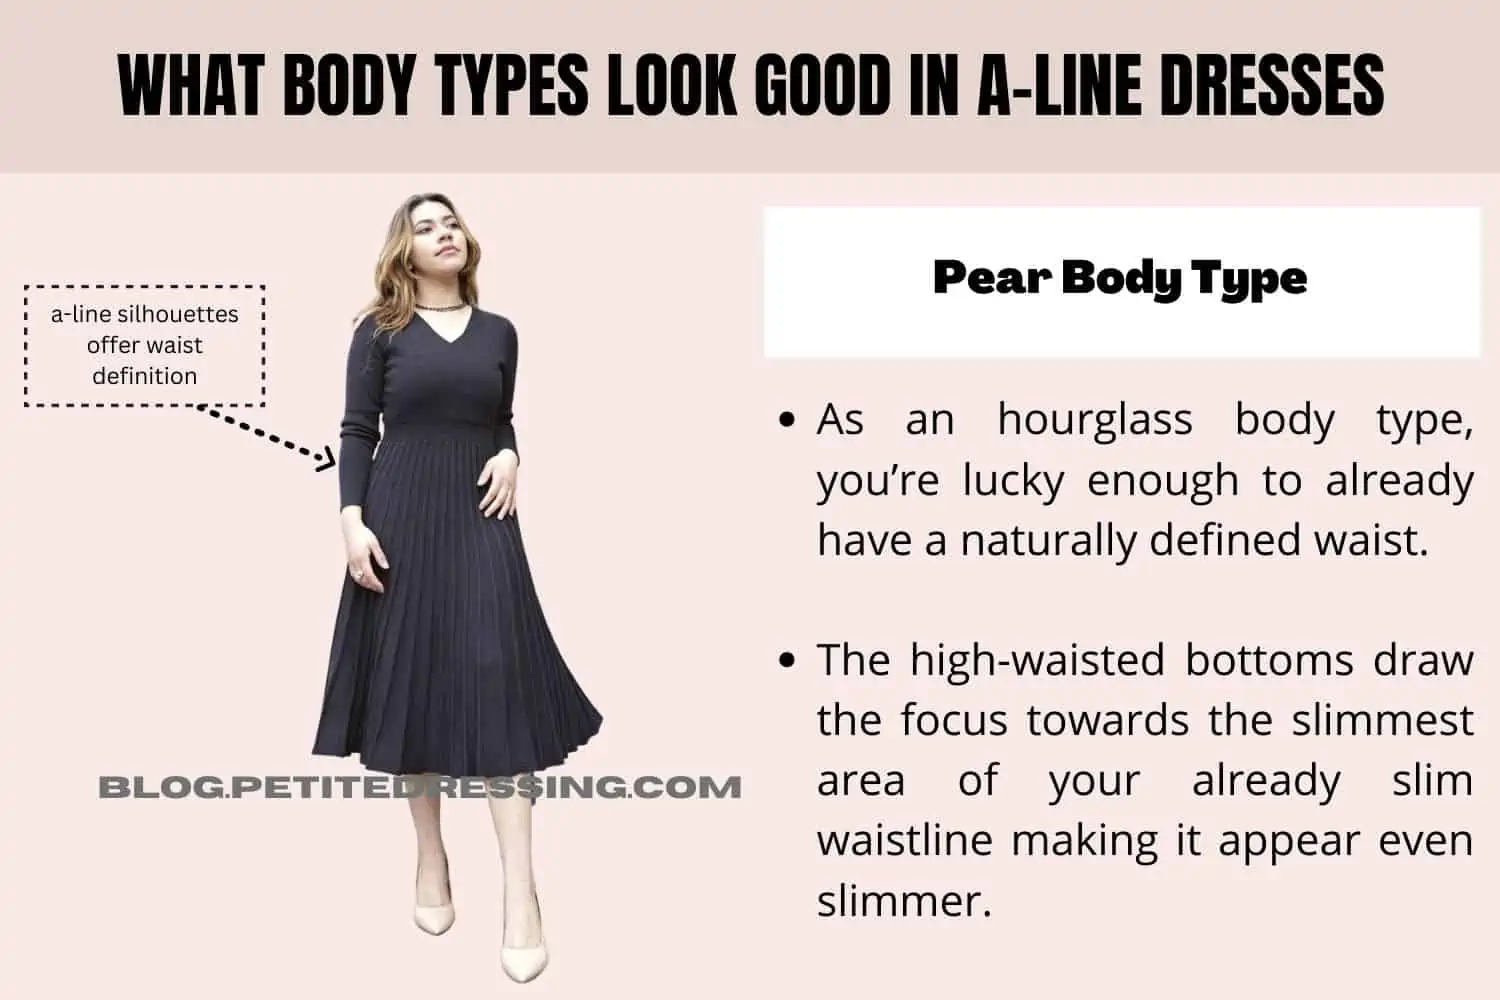 What Is An A-line Dress?